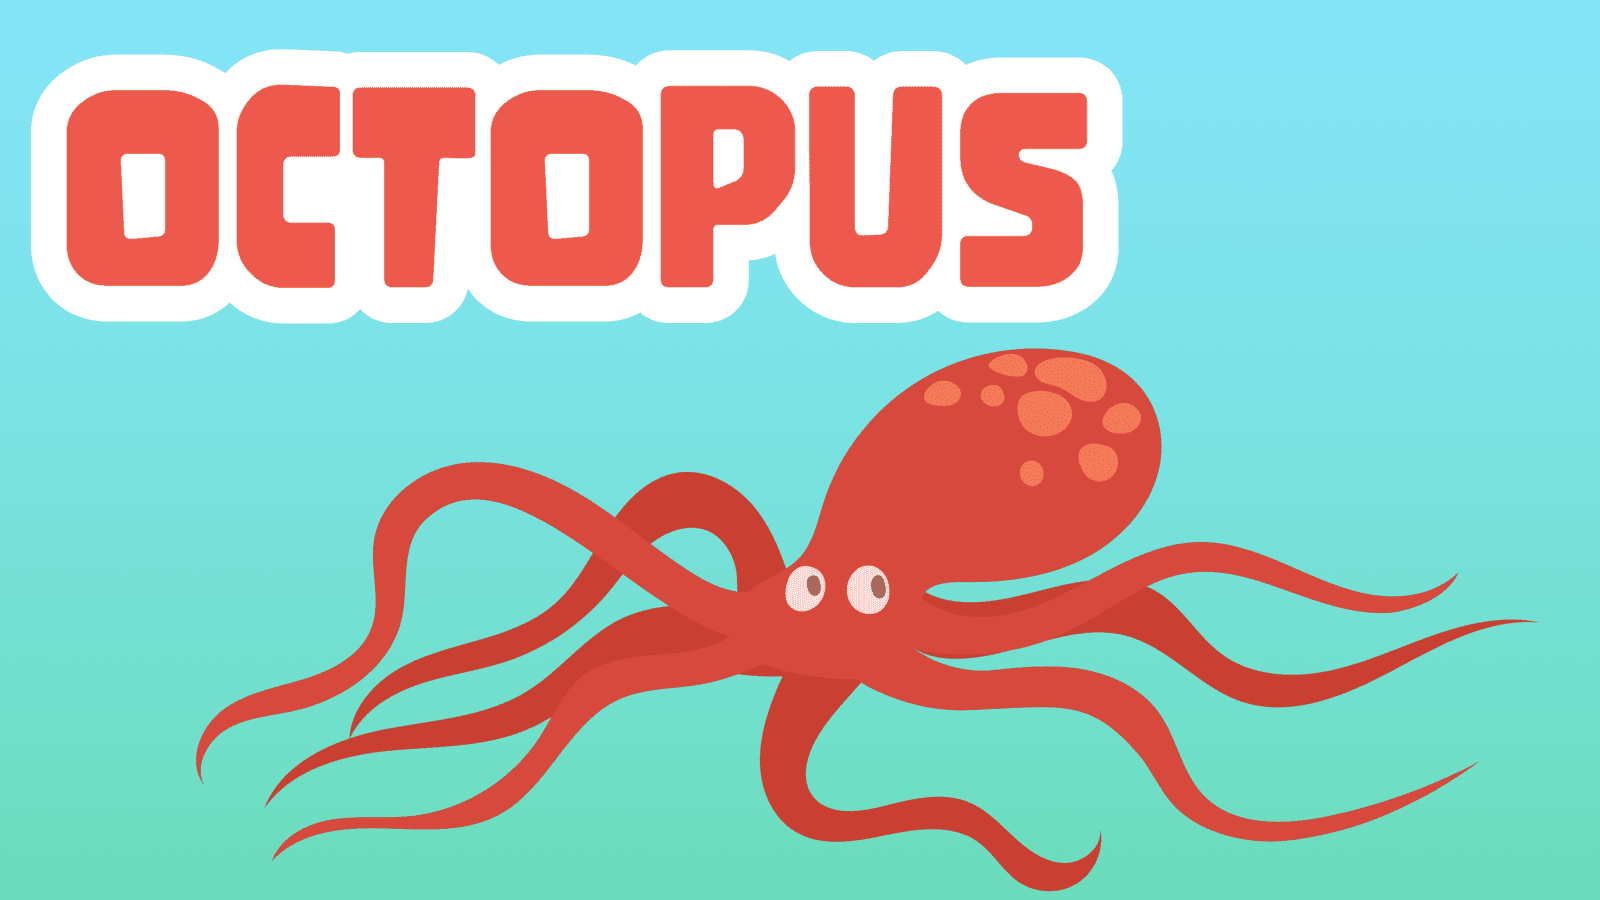 Octopuses: Learn 11 Awe-Inspiring Features of The Eight-Limbed Marine Animal – Part 2